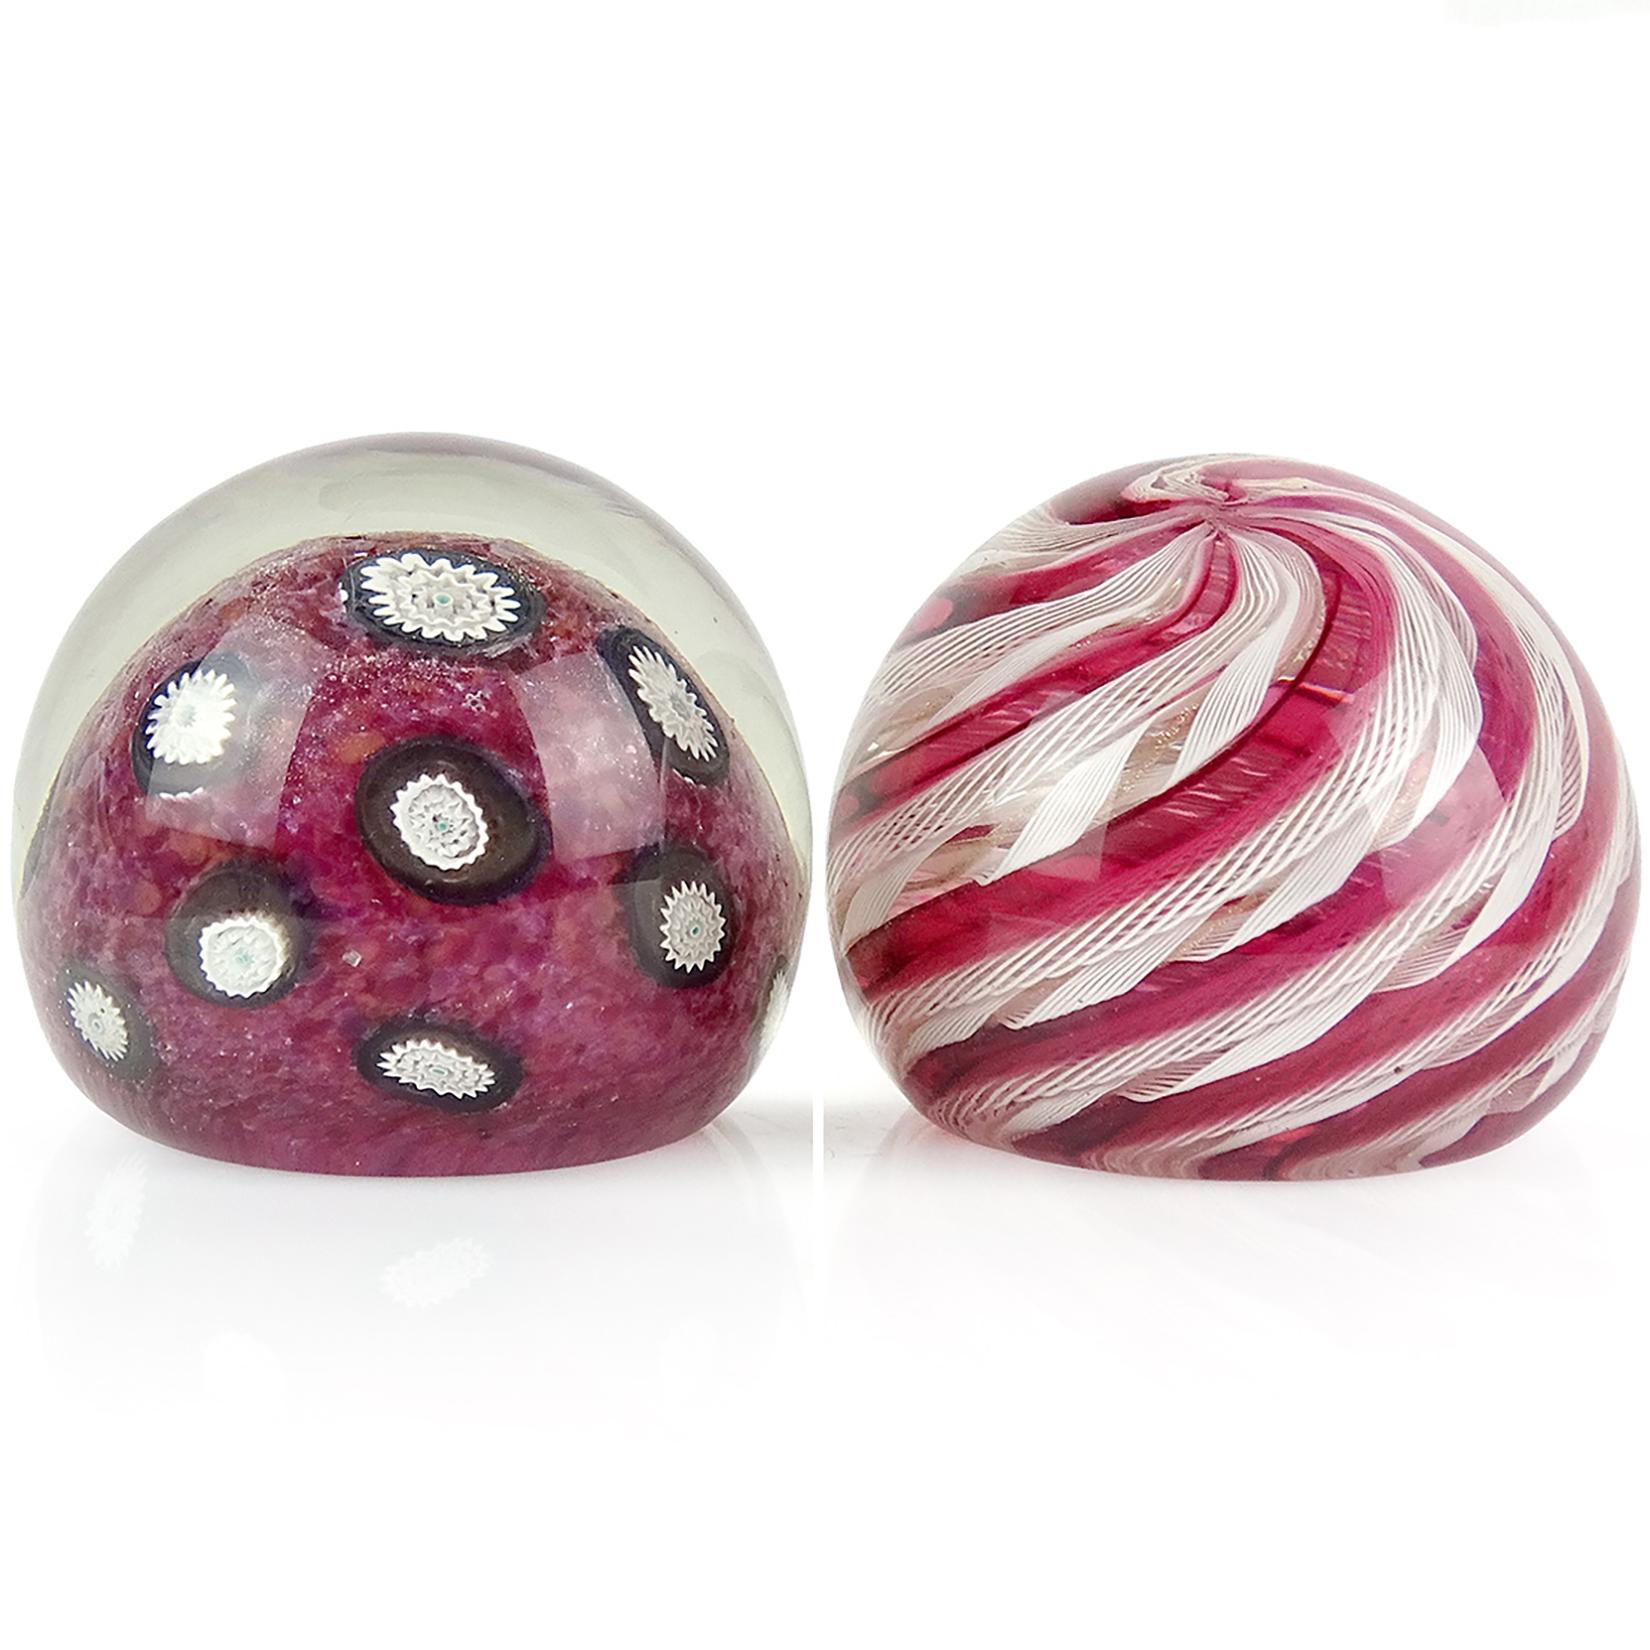 Reserved for Jamie

Beautiful Murano hand blown Italian art glass paperweights. Documented to the Fratelli Toso company. The first is a red dots ground with white and black millefiori flower pieces. Next, a white Zanfirico ribbons and clear red